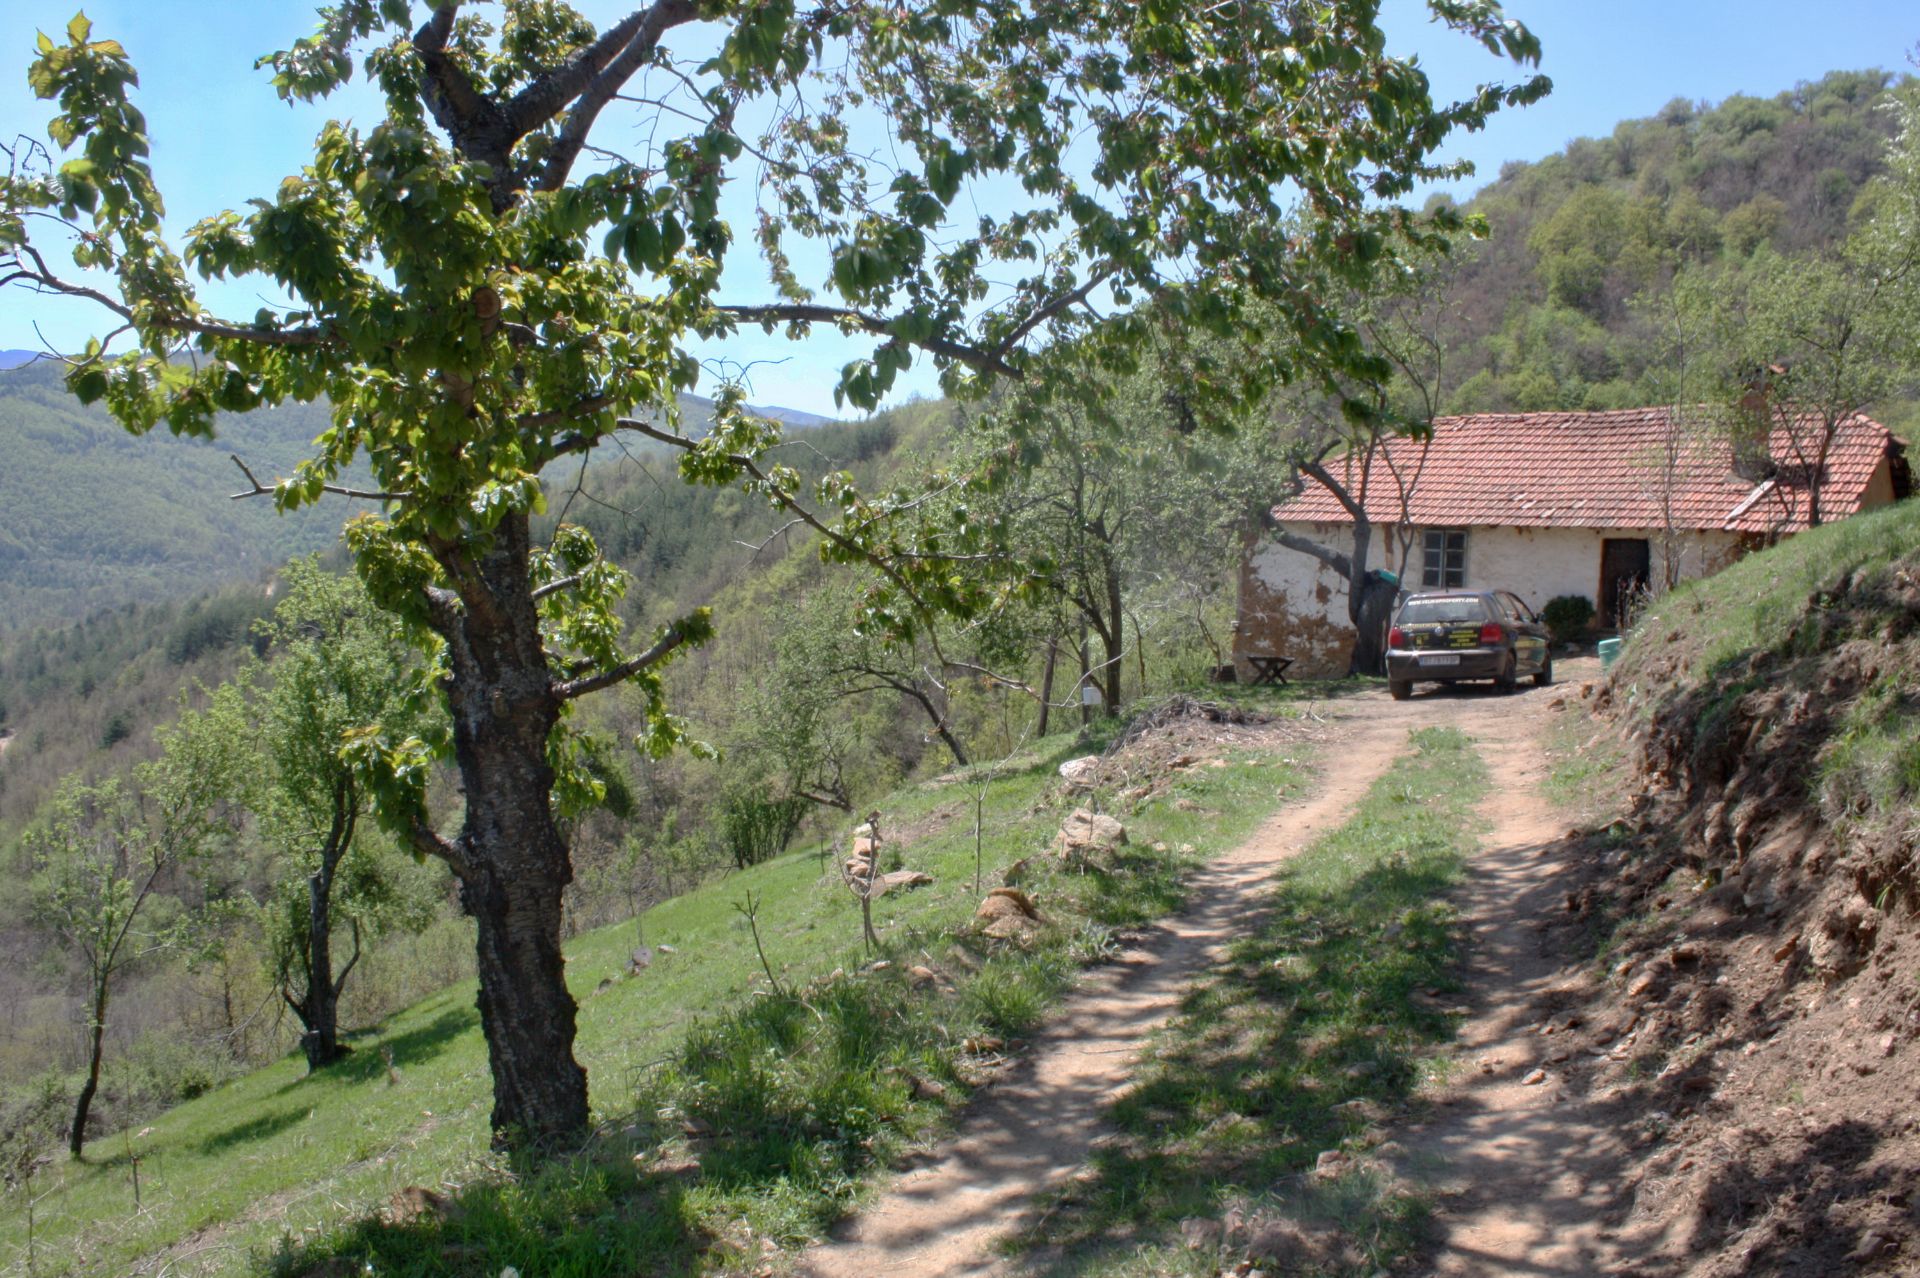 7.5 Acre Ranch in Bulgaria 1h from Sofia - Image 3 of 32